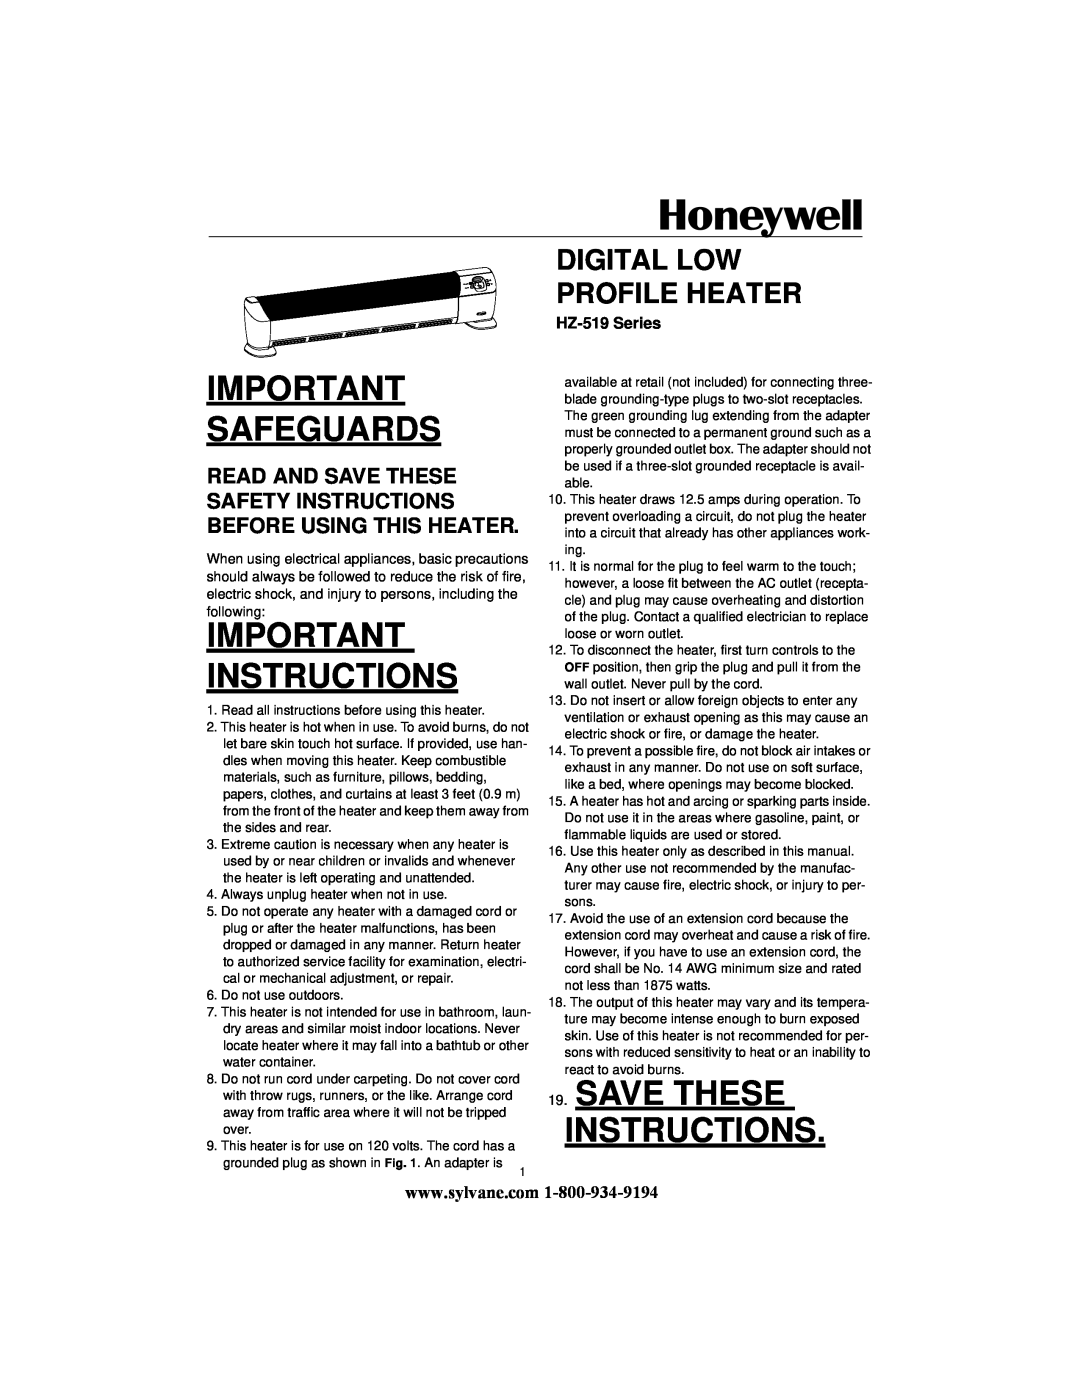 Honeywell HZ-519 manual Safeguards, Important Instructions, Save These Instructions, Digital Low Profile Heater 